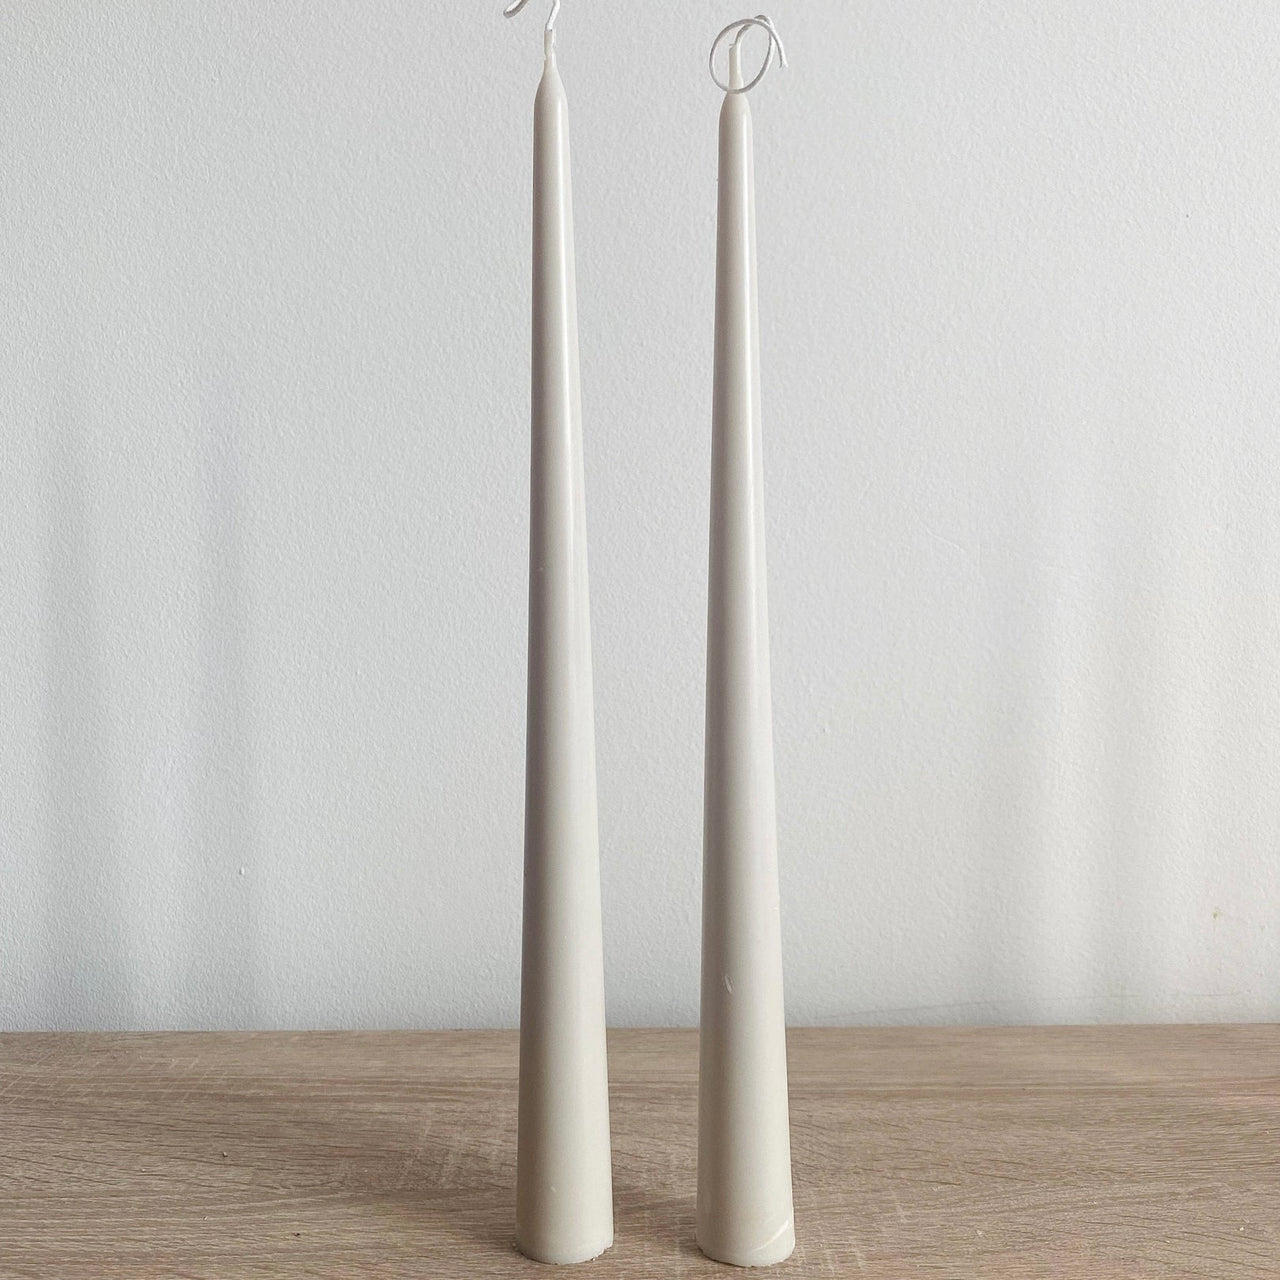 Stone Tall Tapered Candlesticks